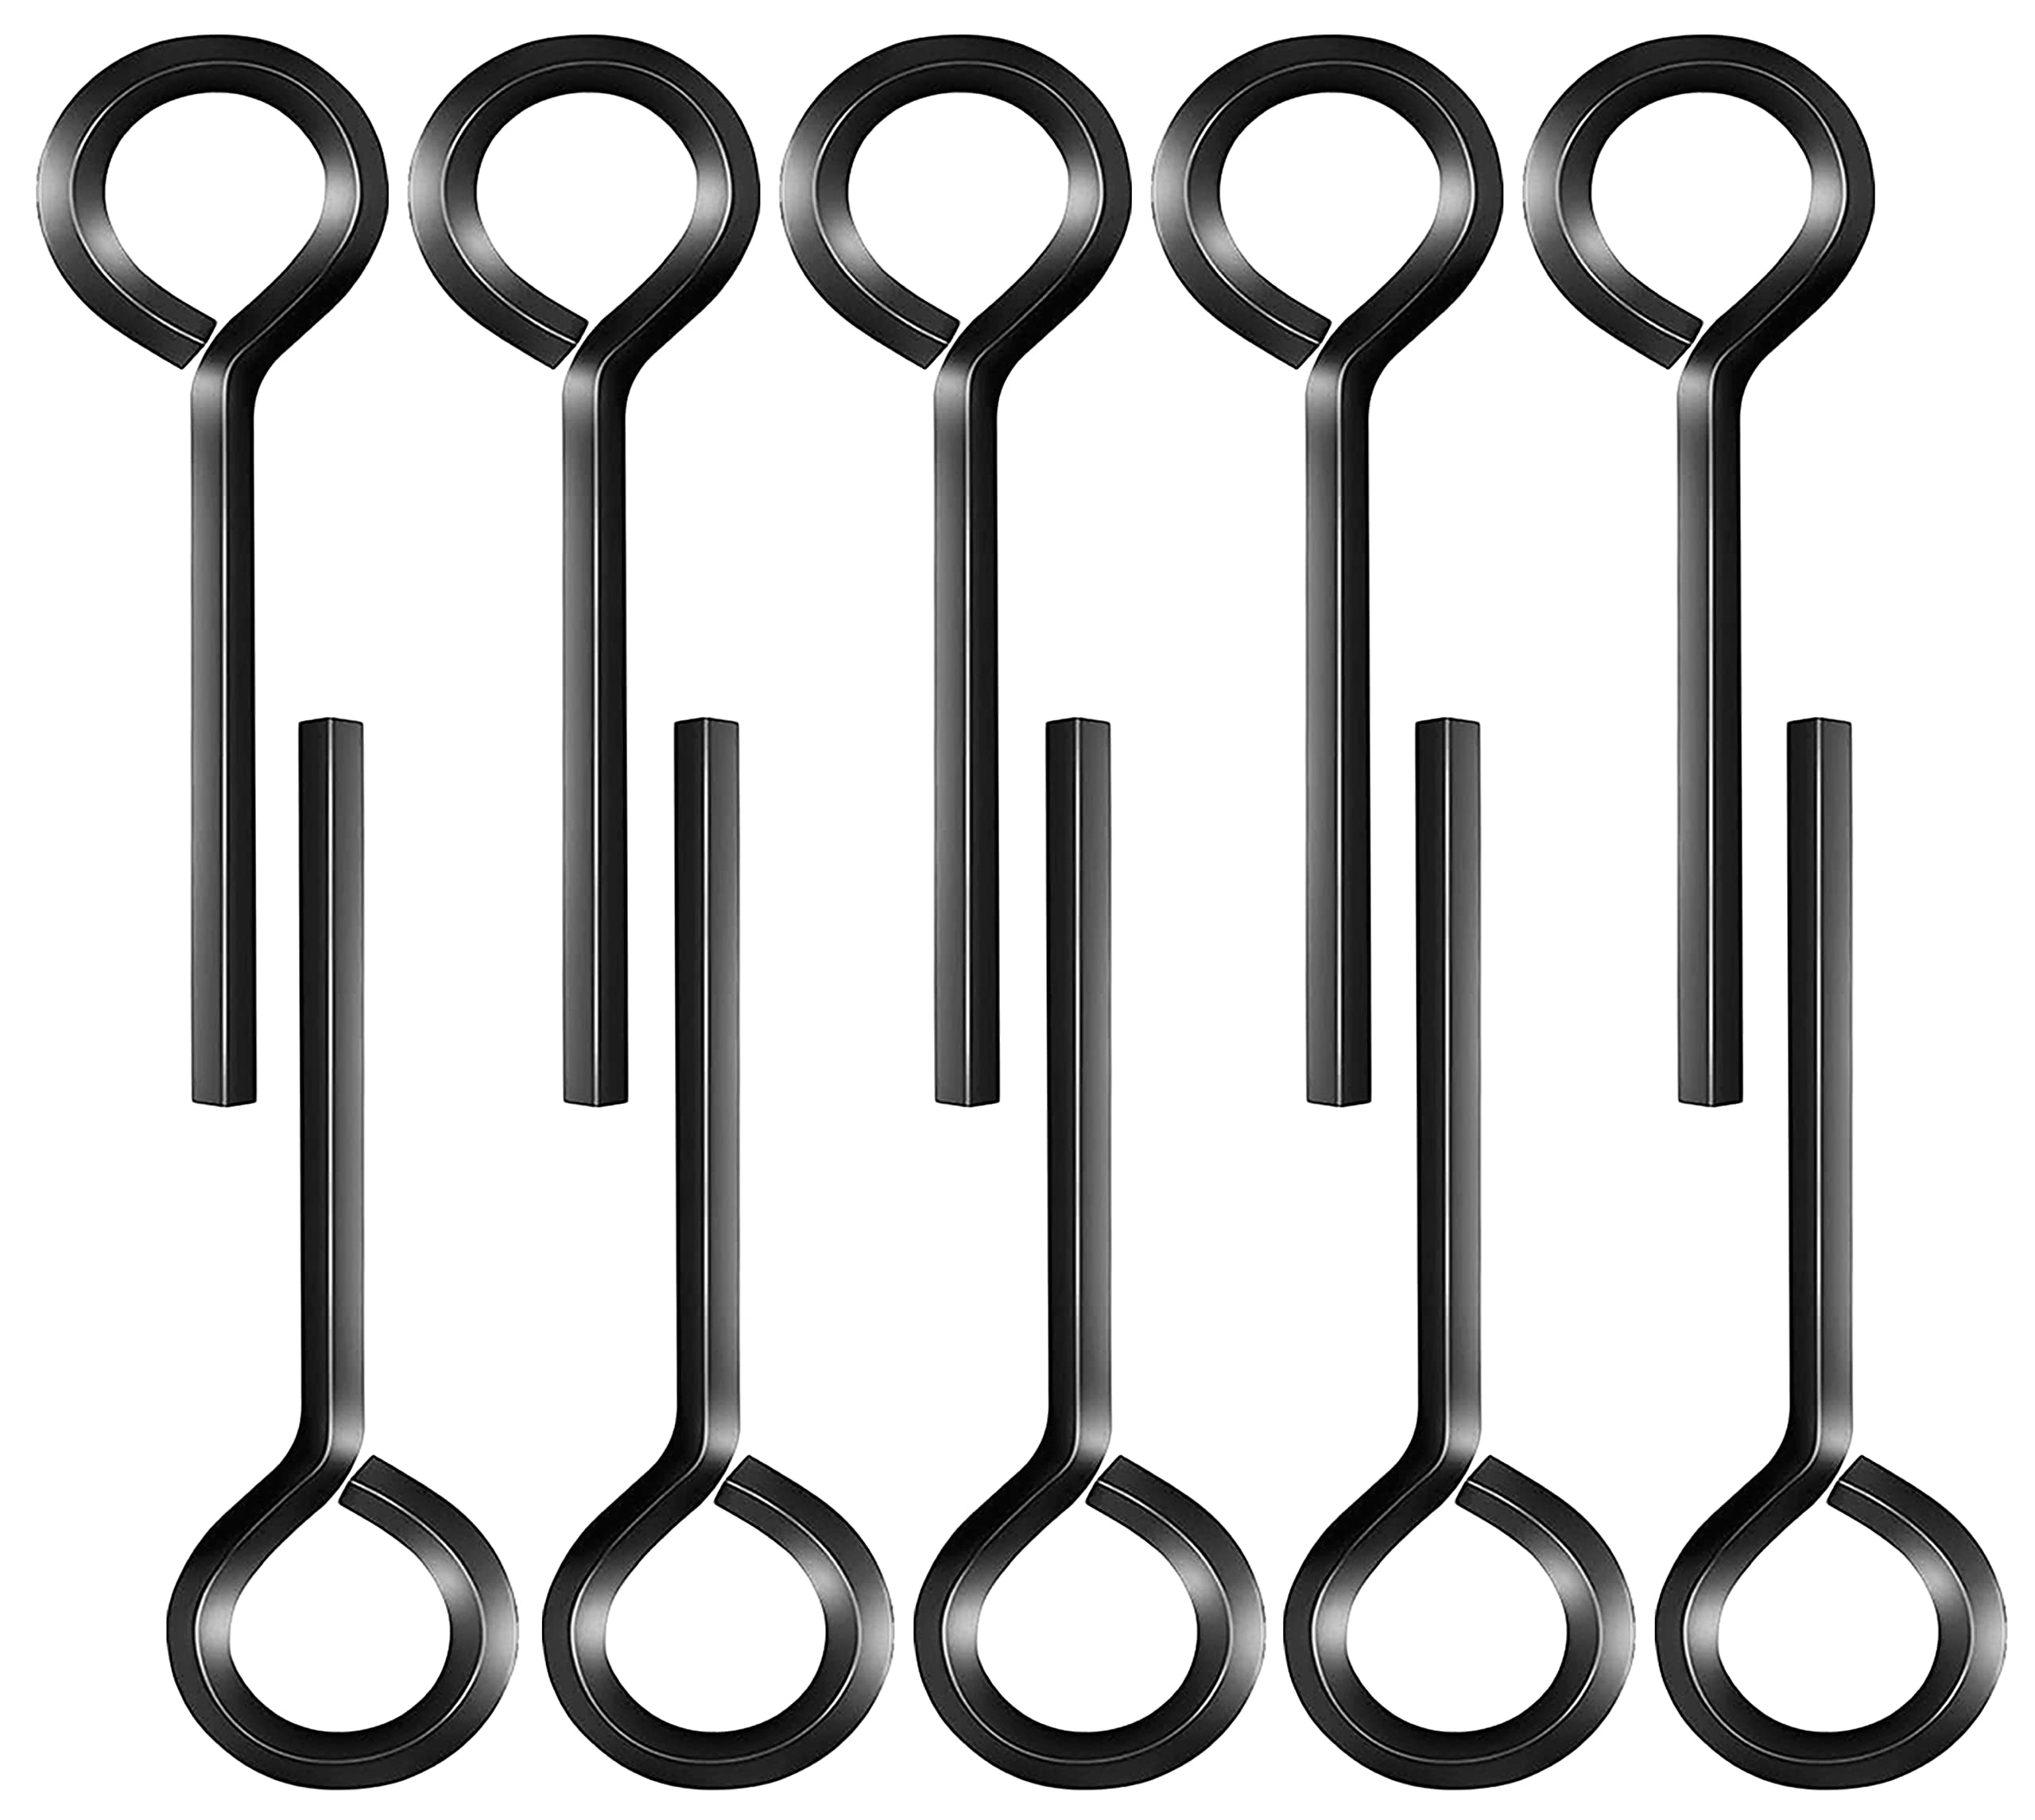 WOODGUILIN 1/8” Standard Hex Dogging Key with Full Loop, Key-Ring Style Dogging Key Set 1/8 Allen Wrench Key for Push Bar Door Panic Bars, Security Door Exit Devices,Solid Metal（10 Pack,1/8 black）